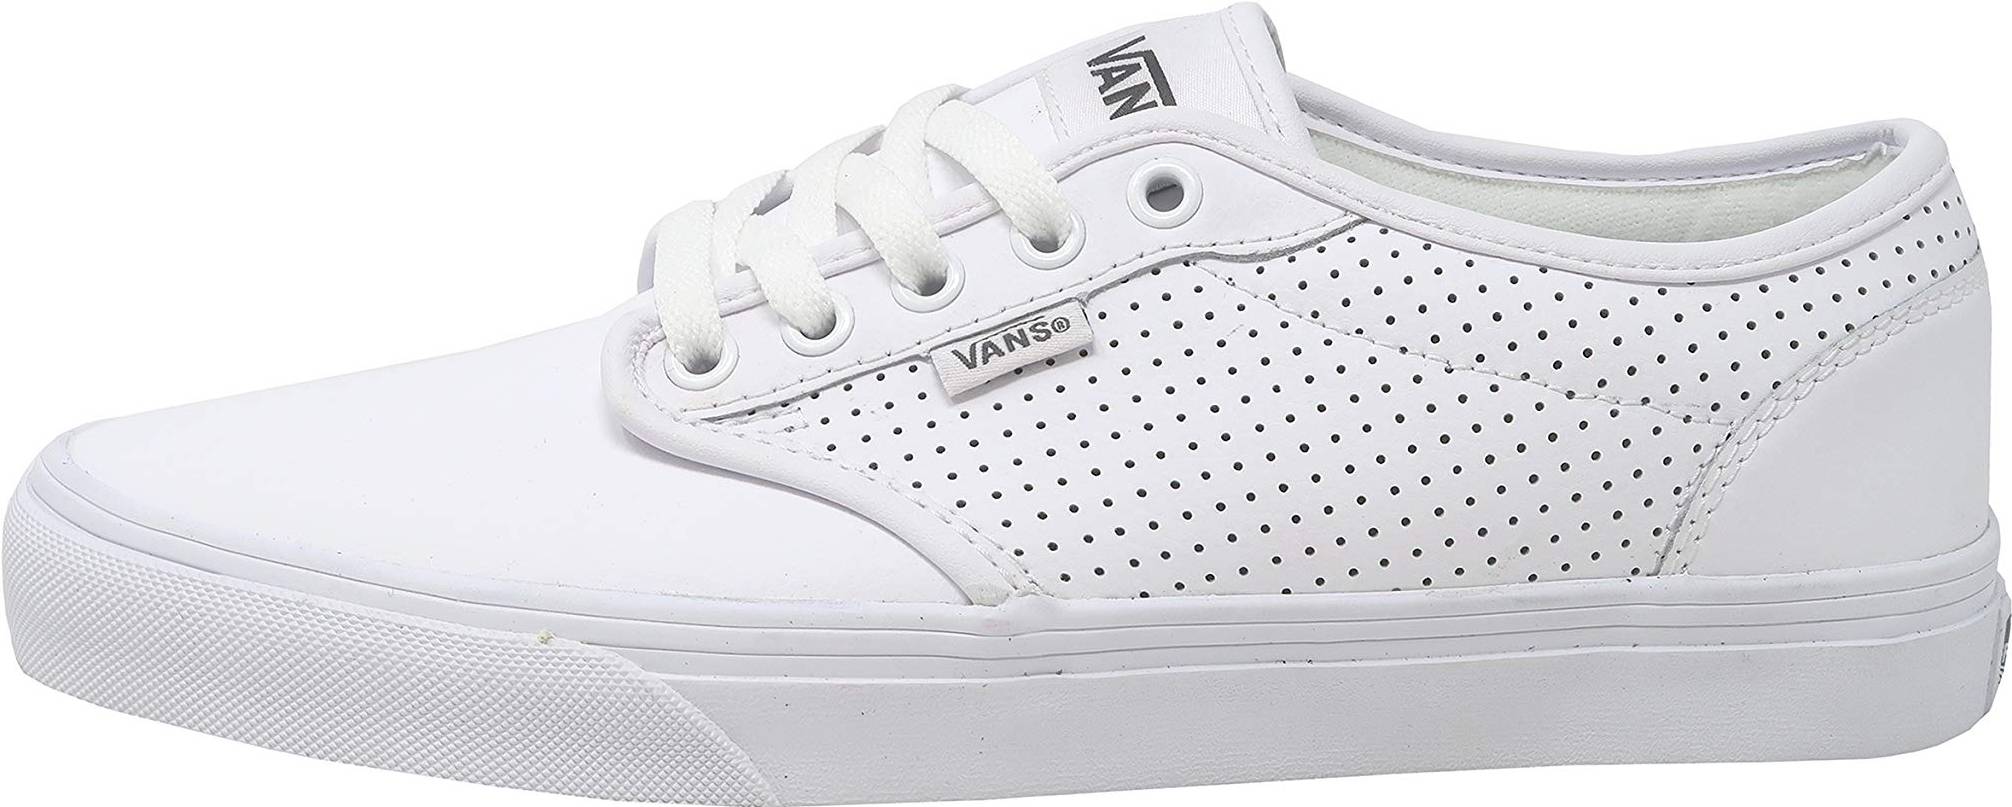 vans chukka white perforated leather shoe